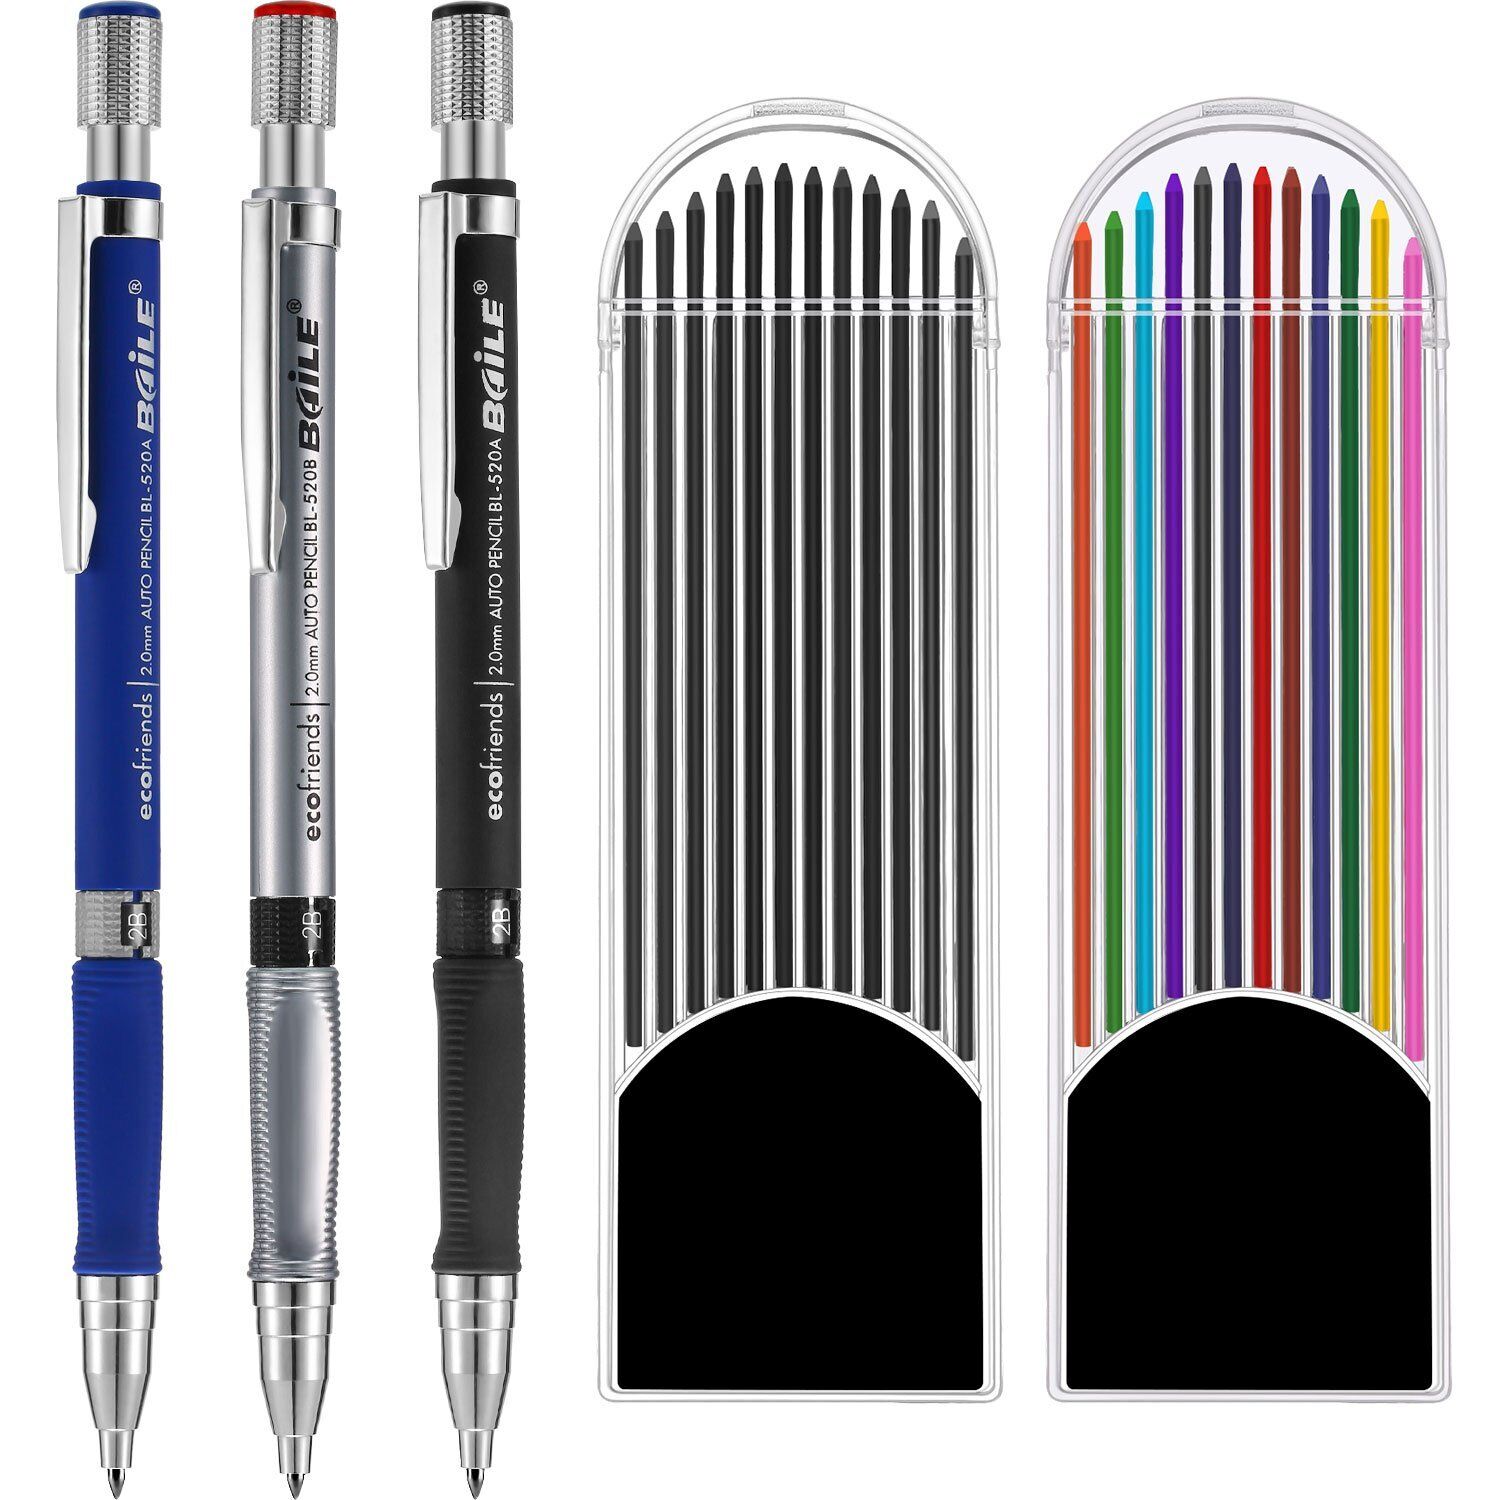 3 PCS 2.0 mm Mechanical Pencil with 2 Cases Lead Color and Black Refills Art